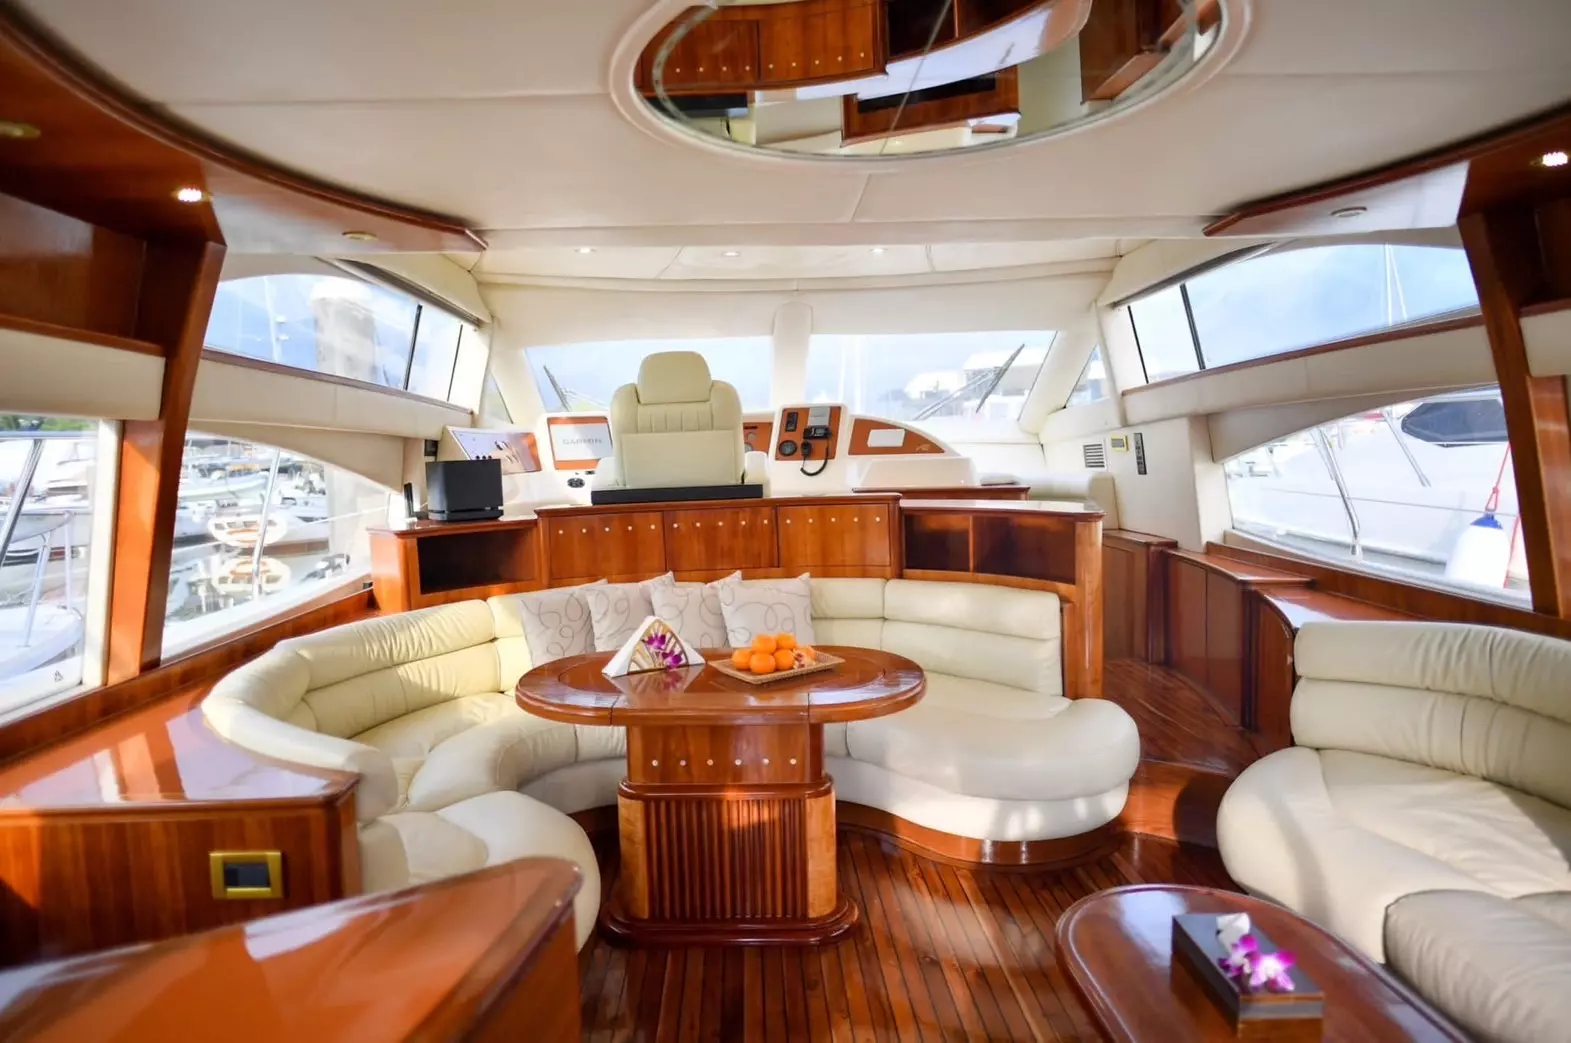 Arisa by Azimut - Top rates for a Rental of a private Motor Yacht in Thailand